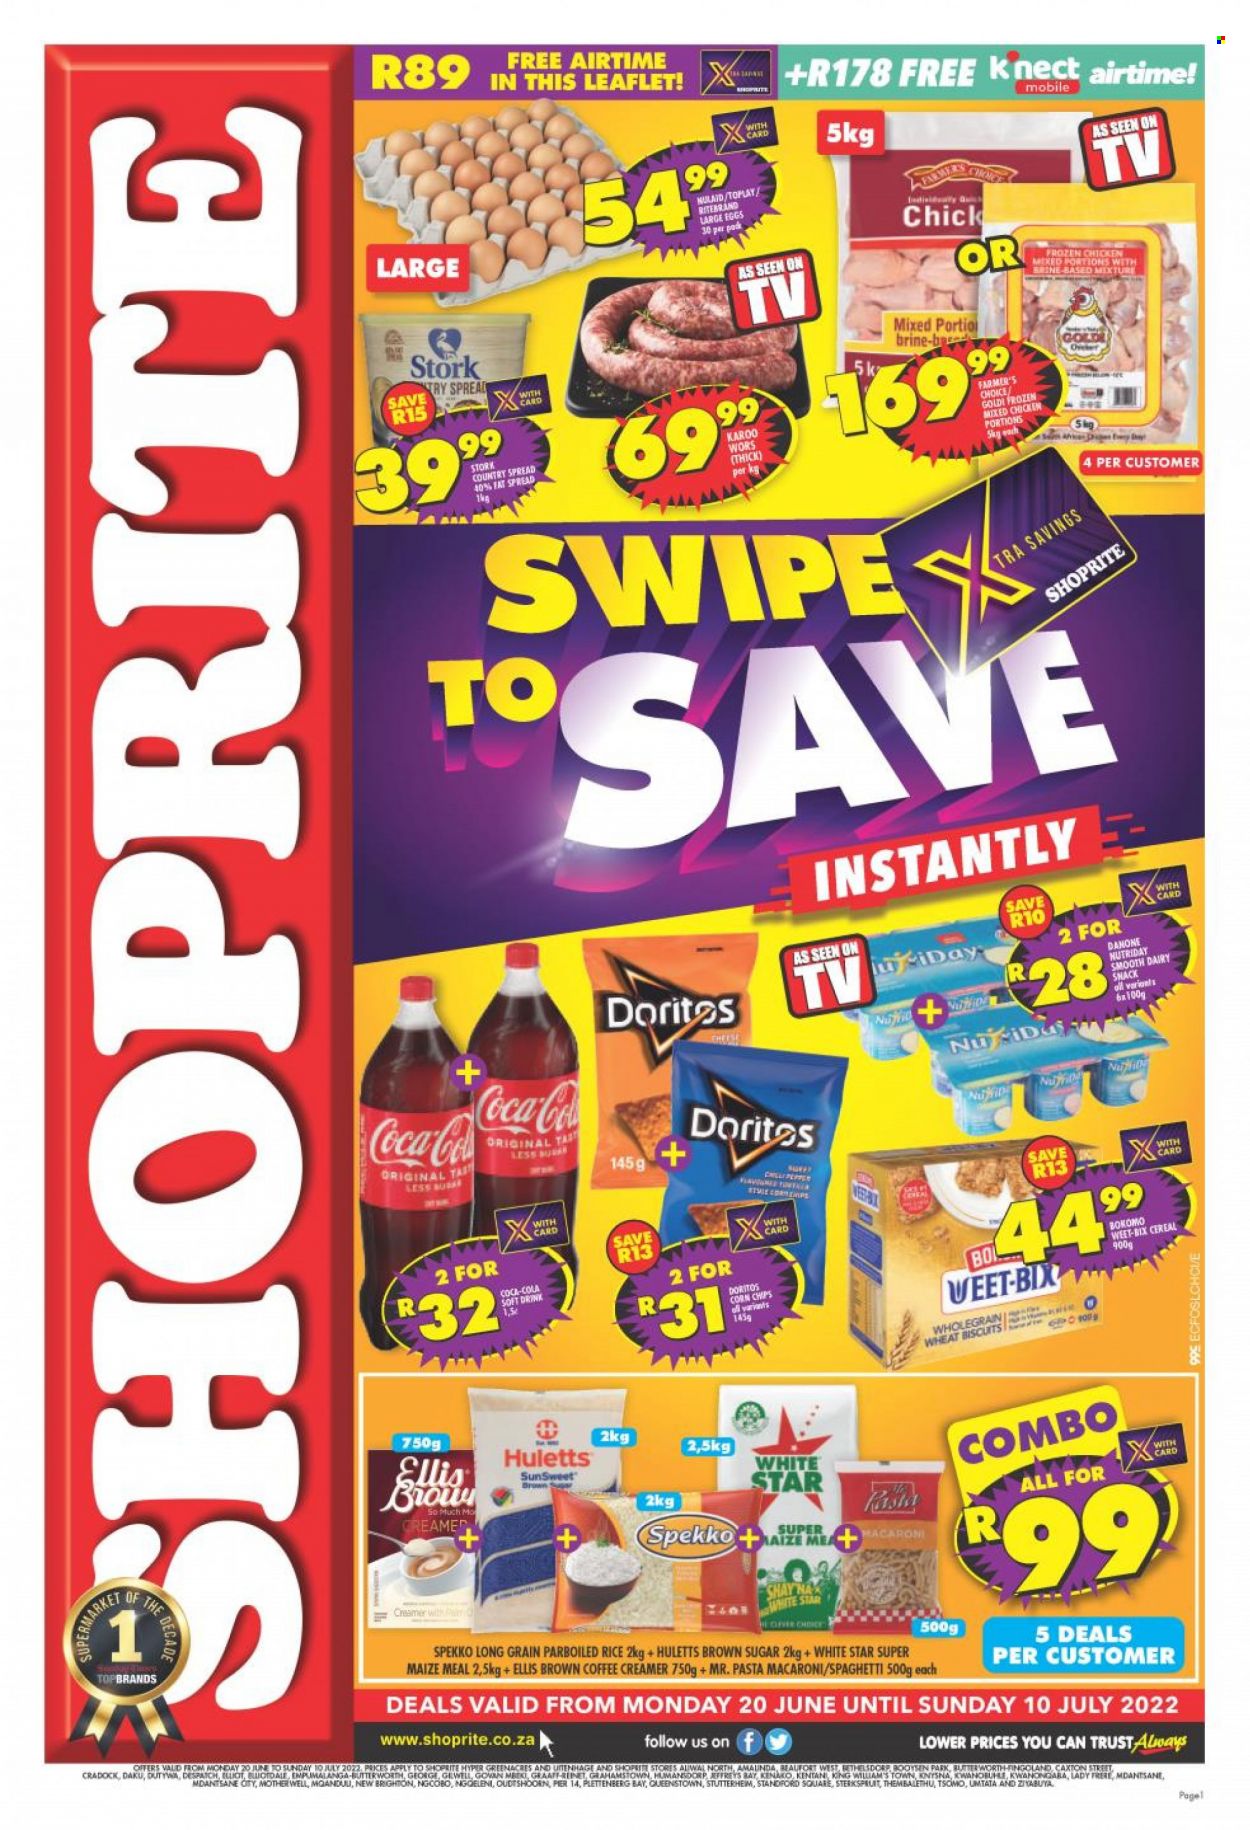 Shoprite catalogue  - 20/06/2022 - 10/07/2022 - Sales products - spaghetti, macaroni, pasta, Danone, NutriDay, Ellis Brown, large eggs, fat spread, creamer, snack, cereal bar, biscuit, Doritos, corn chips, cane sugar, maize meal, Huletts, White Star, cereals, Weet-Bix, rice, parboiled rice, Spekko, Coca-Cola, soft drink, chicken meat, Surf. Page 1.